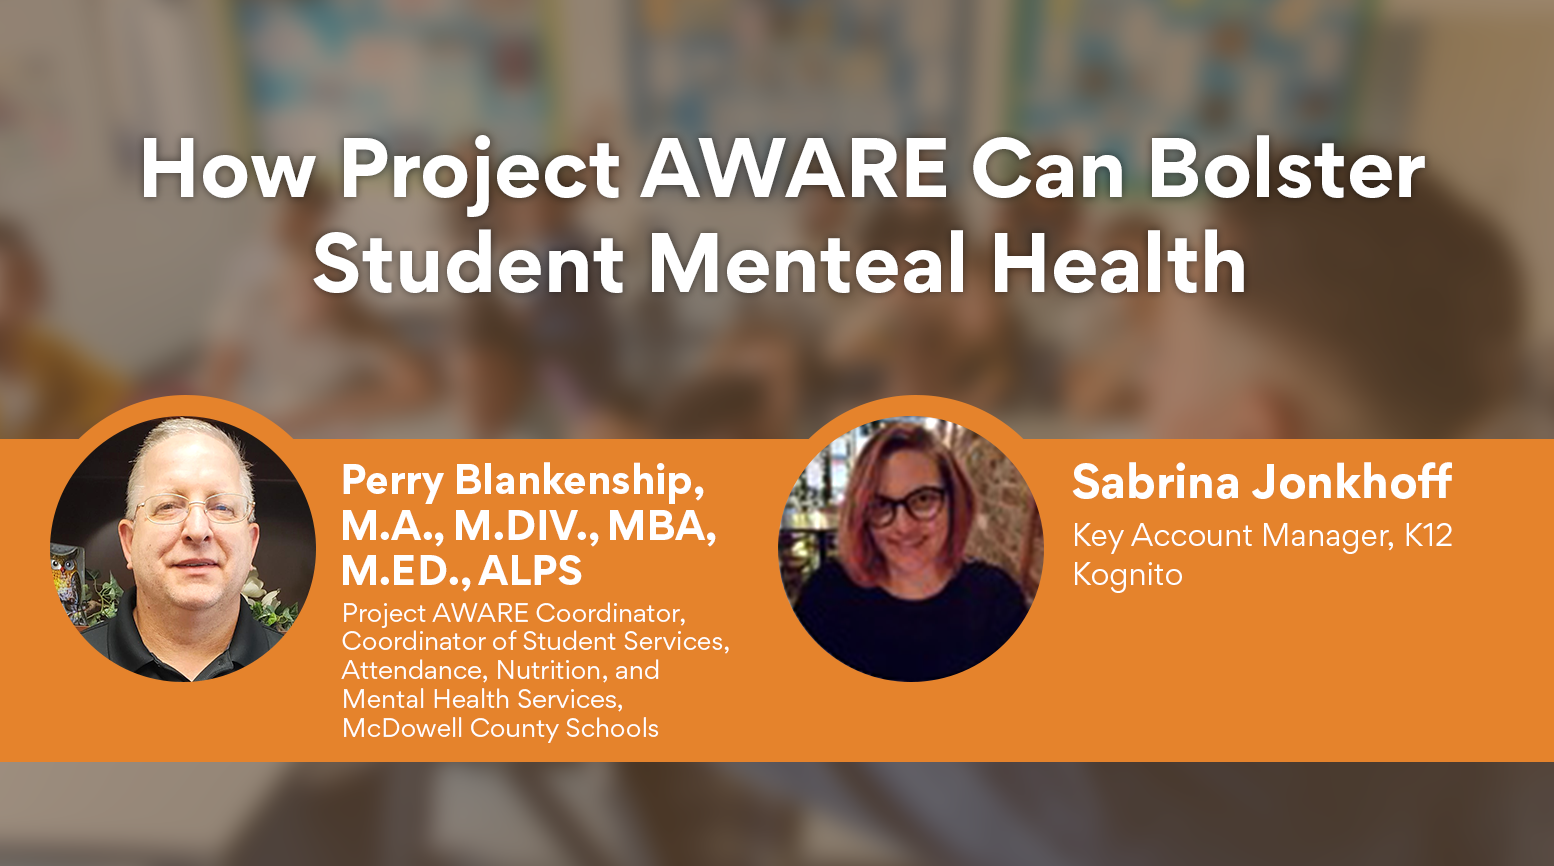 How Project AWARE Can Bolster Student Mental Health